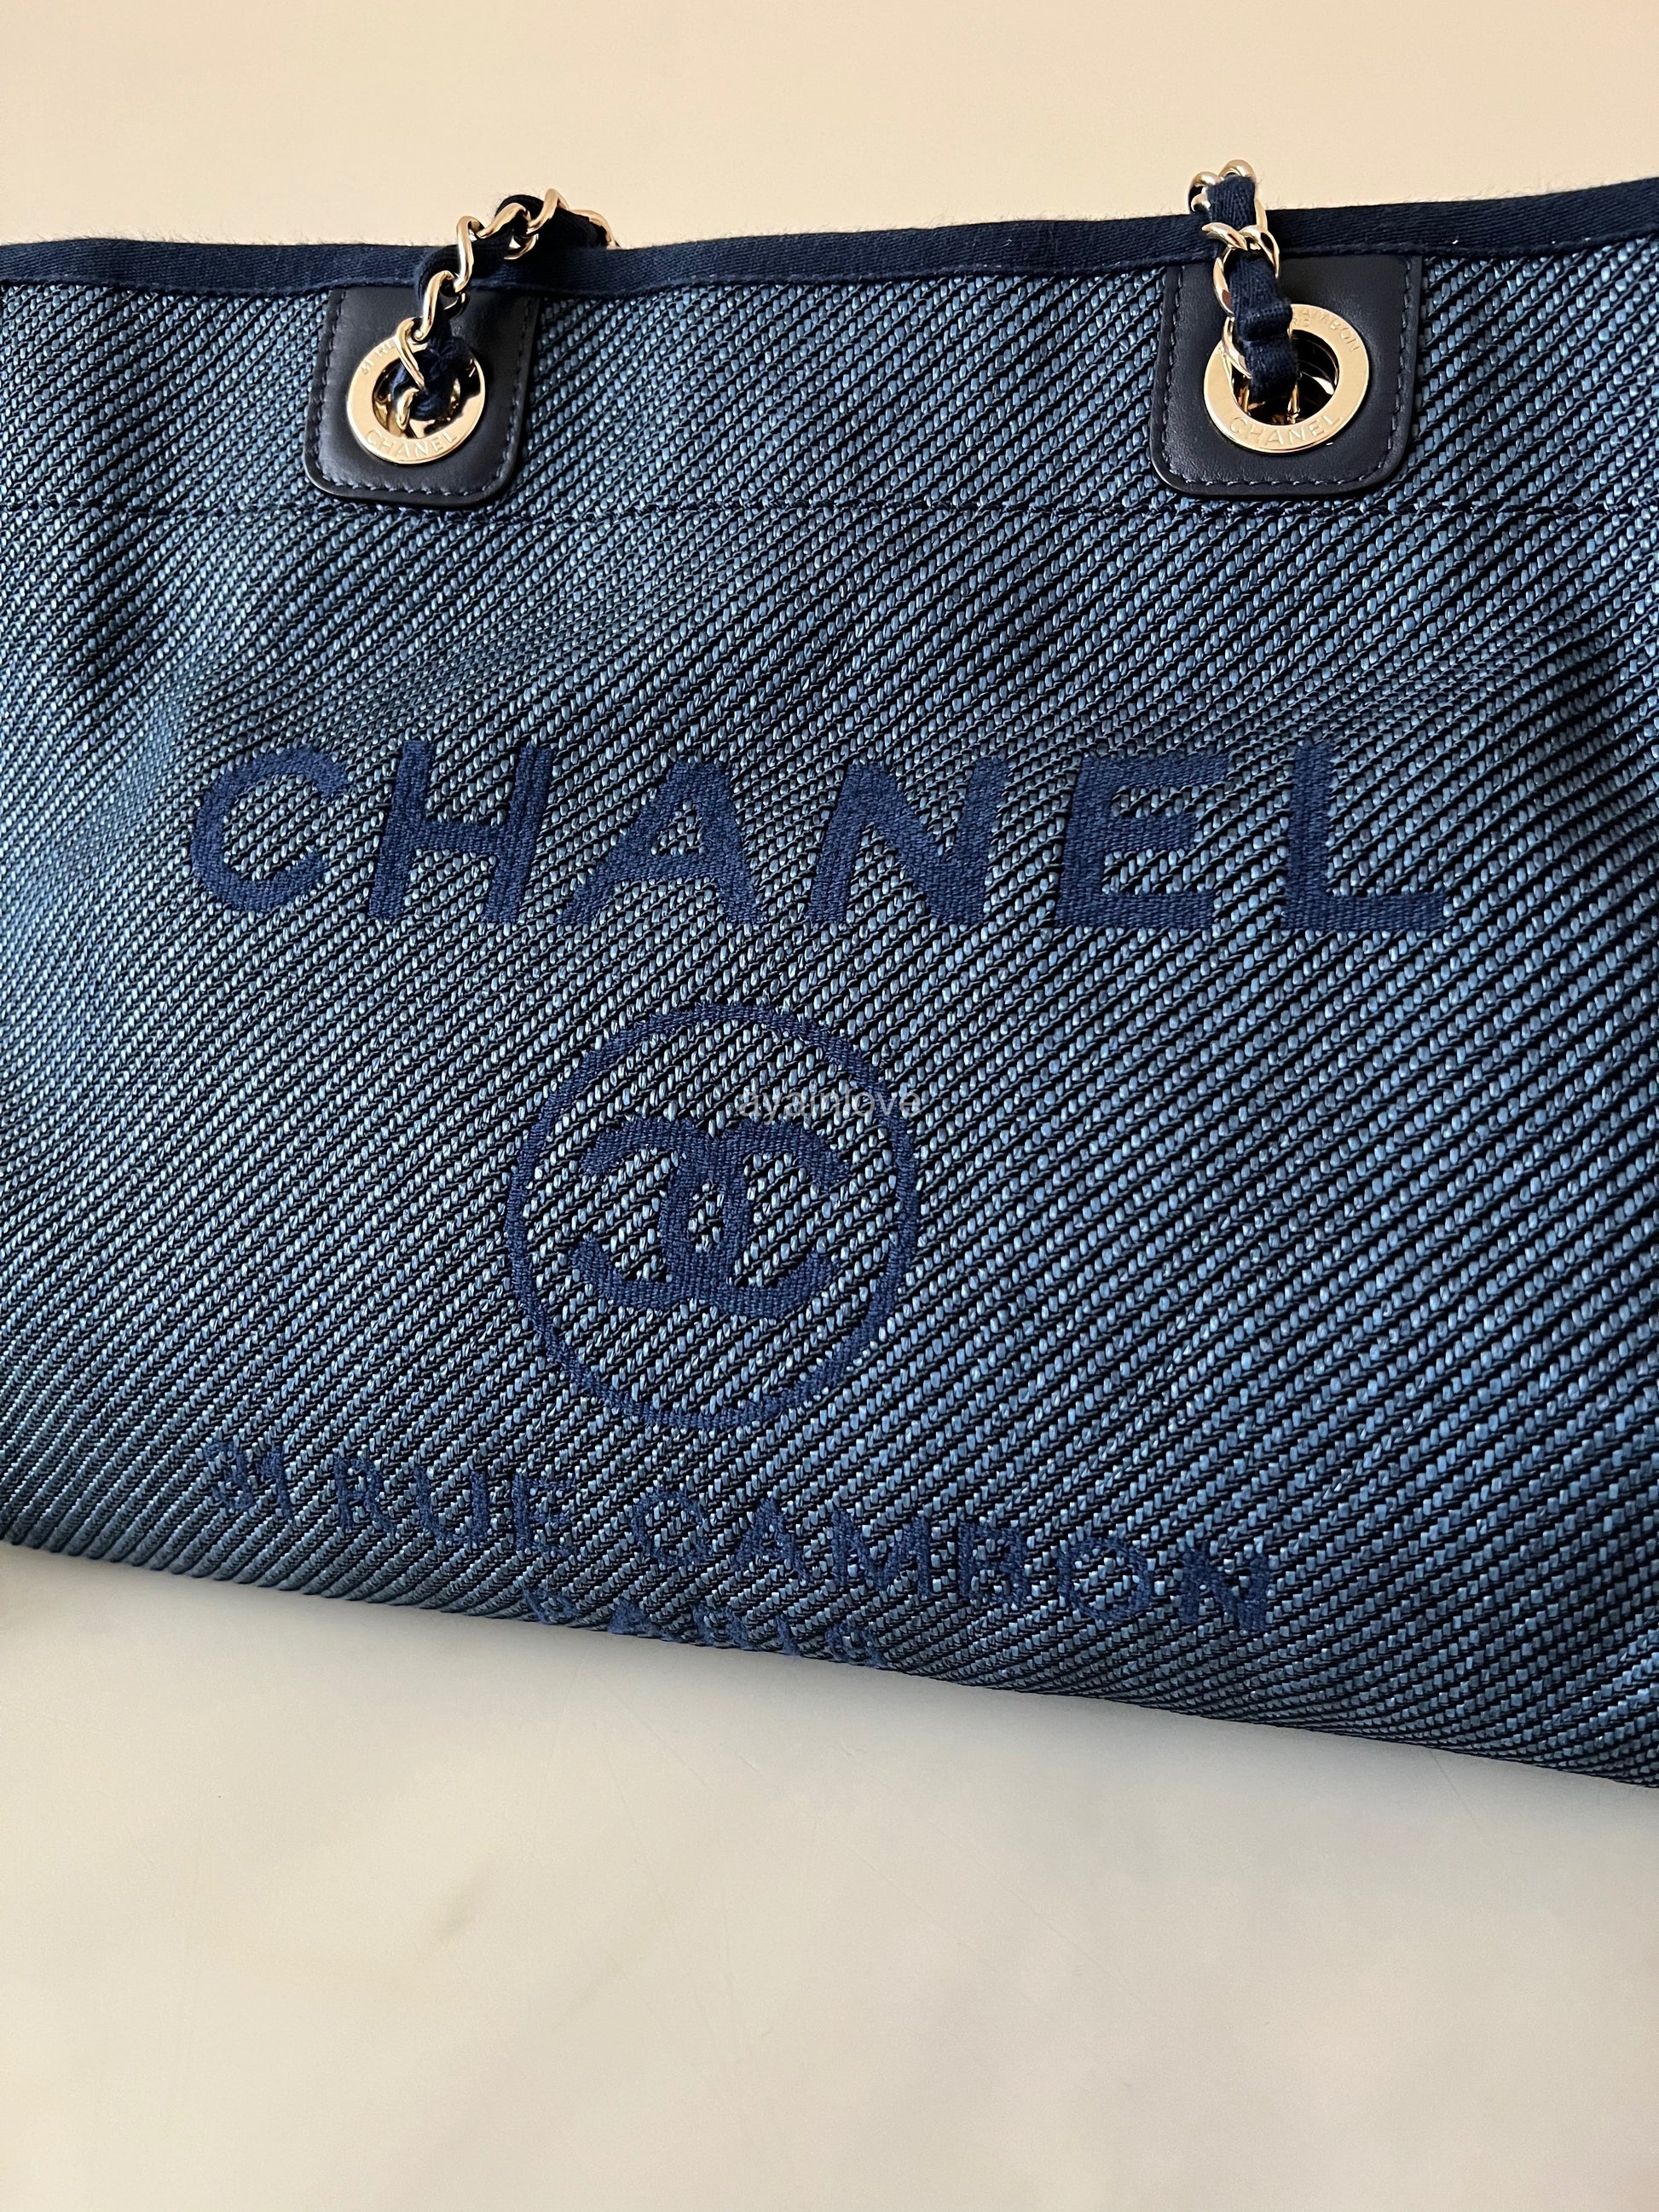 Chanel Medium Deauville Tote Bag NEW 2020